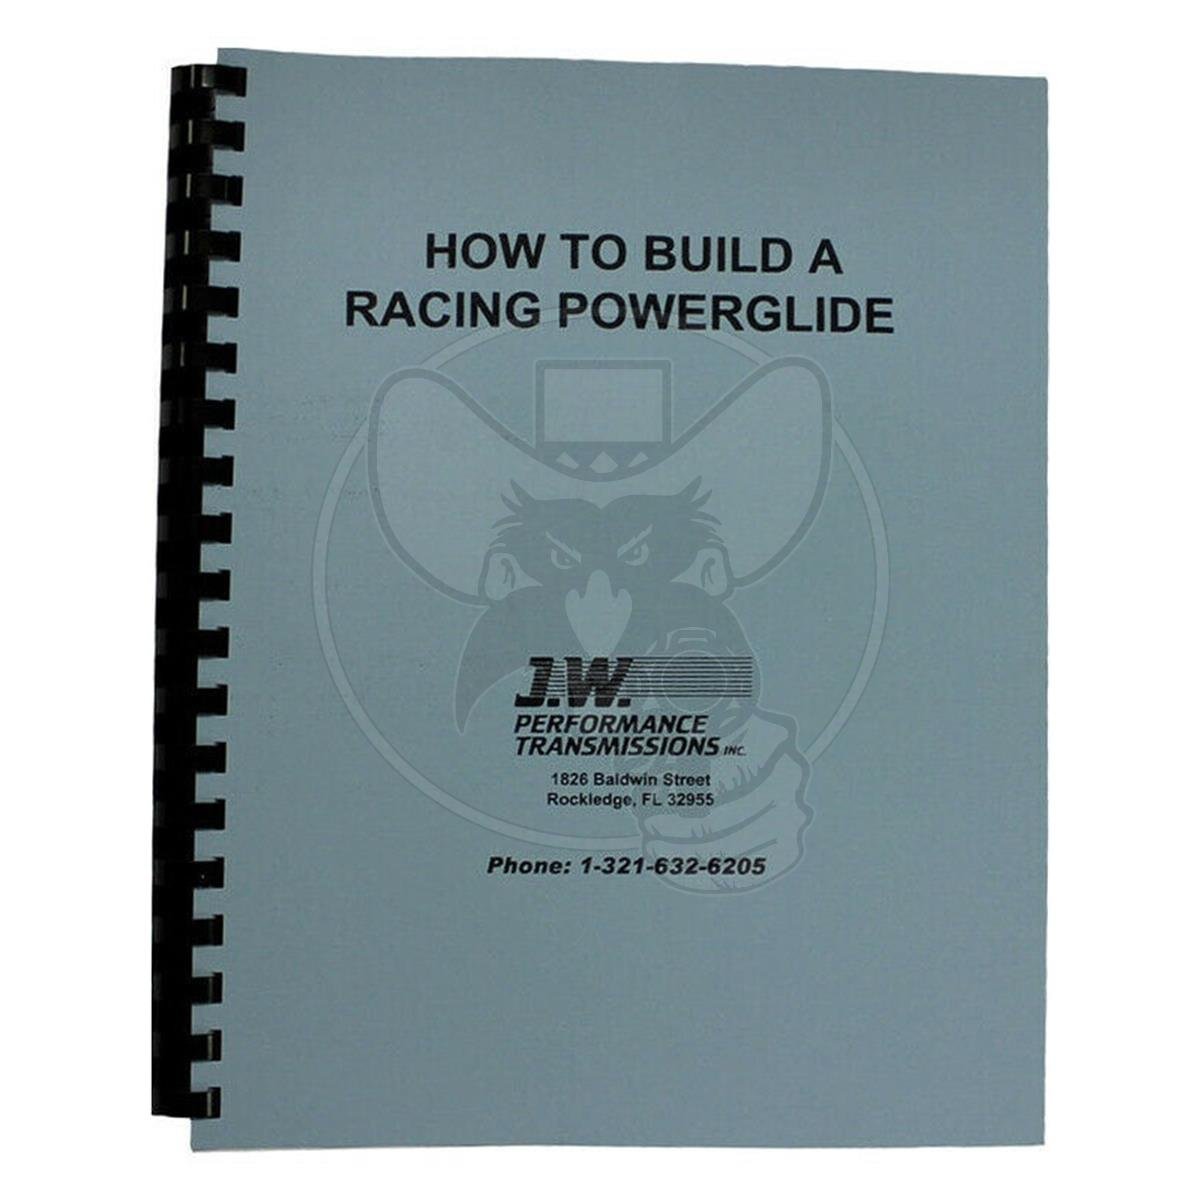 JW BOOK "HOW TO BUILD A RACING POWERGLIDE" 70-PAGES